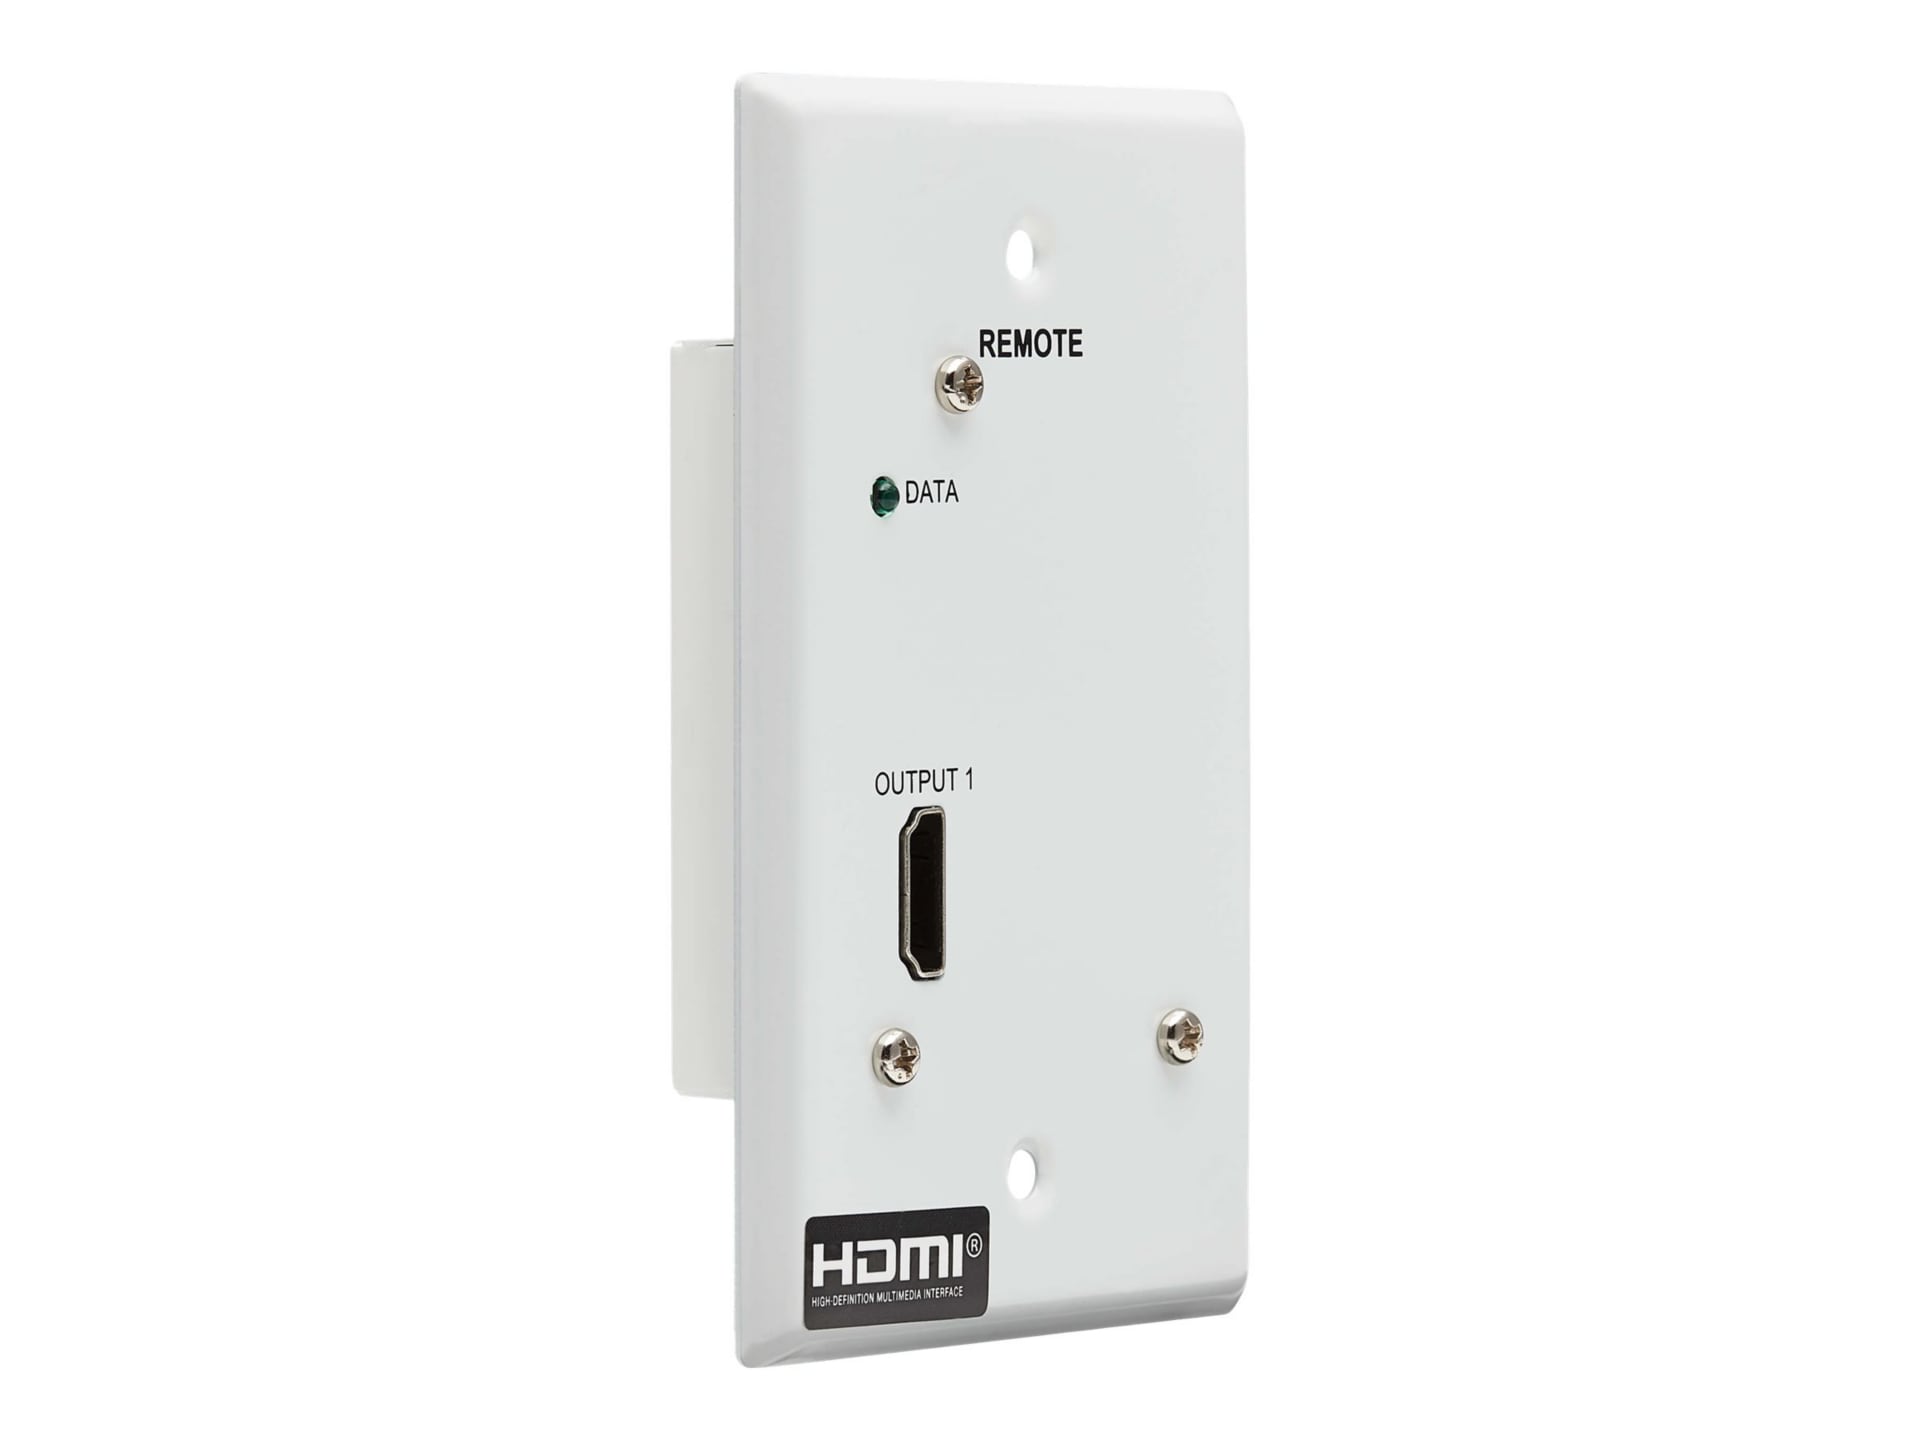 Tripp Lite HDMI over Cat6 Receiver 1-Port Wall Plate - 4K 60 Hz, HDR, 4:4:4, PoC, HDCP 2.2, 230 ft. (70.1 m),TAA -